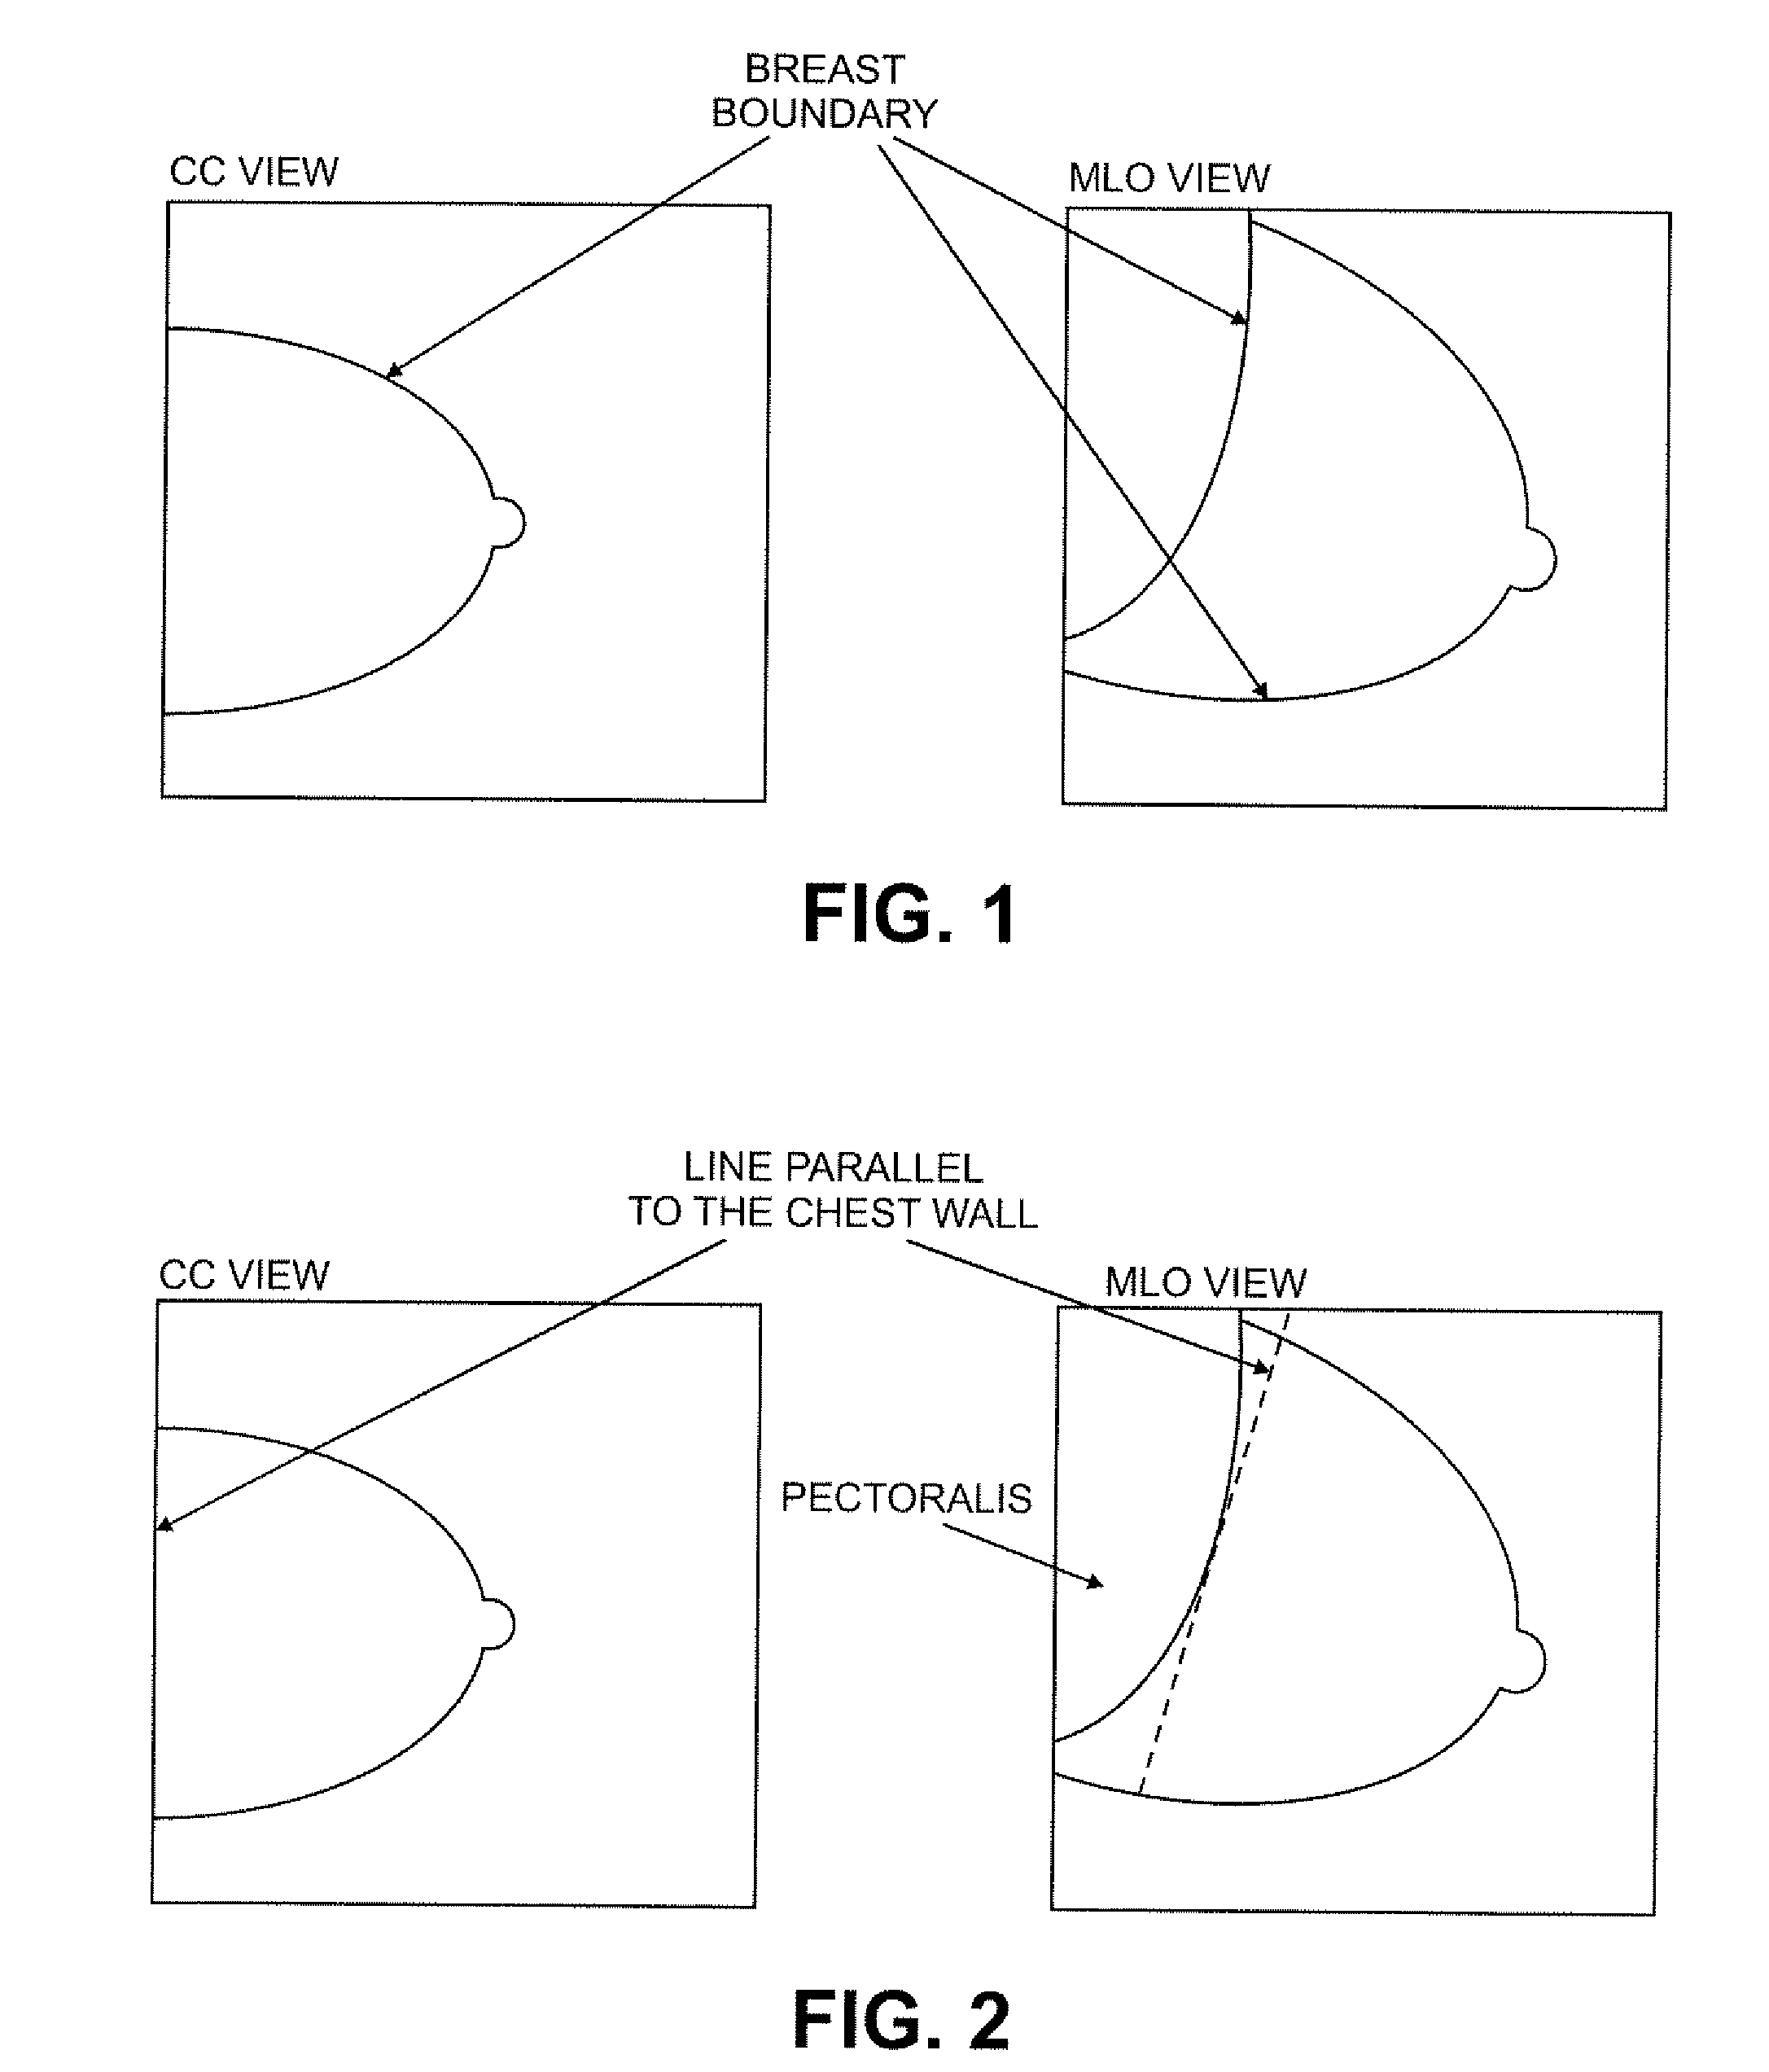 Methods and Apparatus for Computer Automated Diagnosis of Mammogram Images